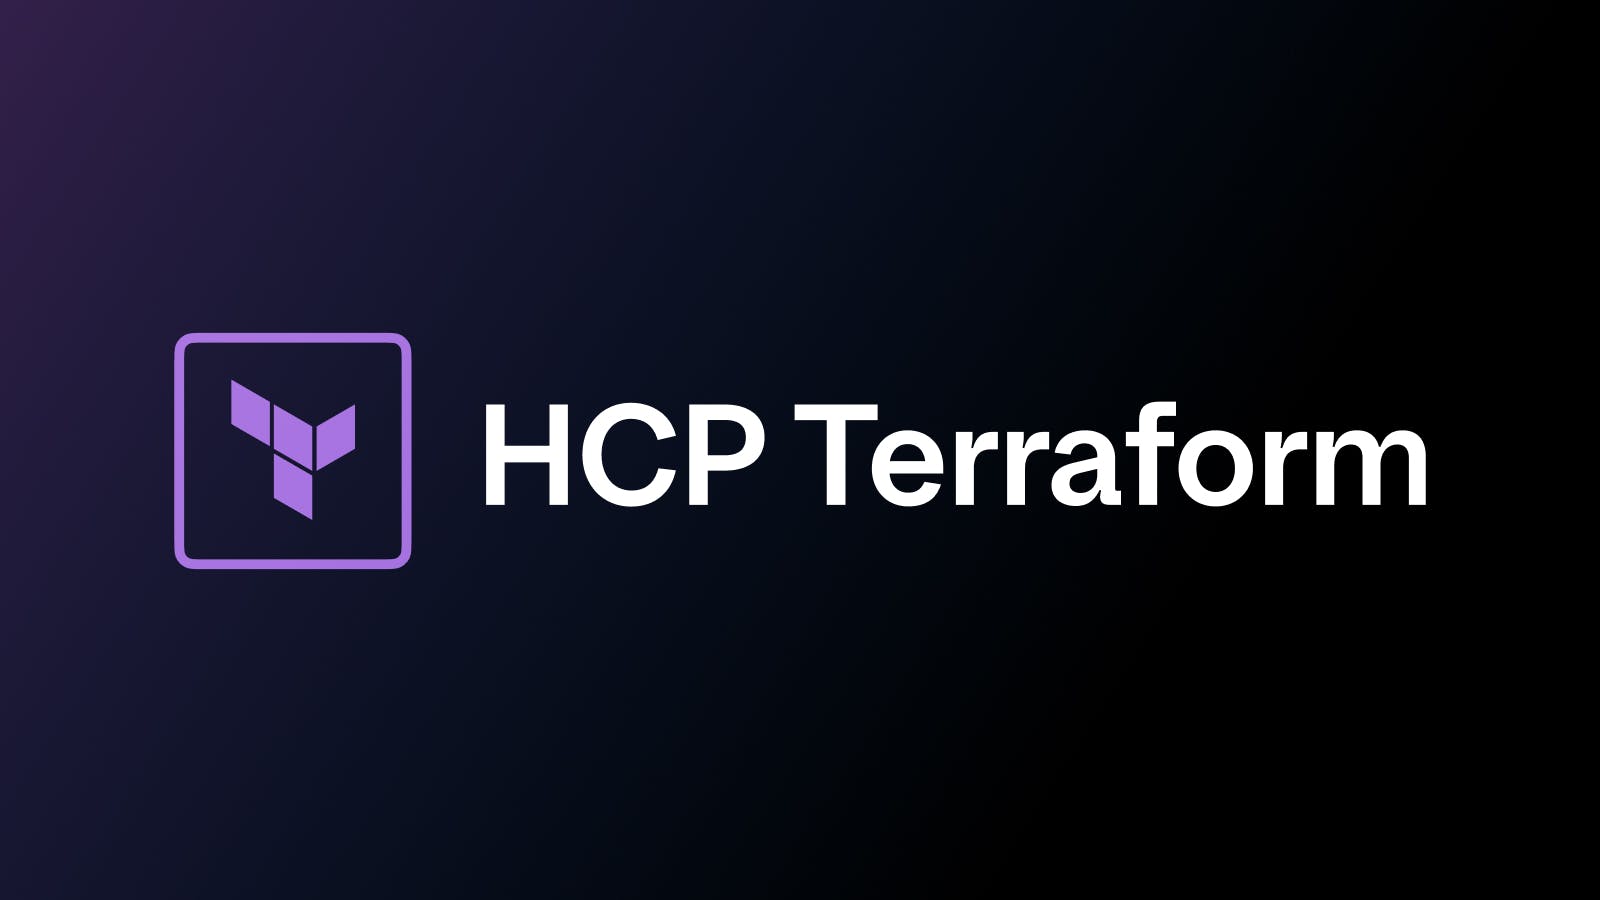 Terraform Cloud now supports multiple configurations for dynamic provider credentials